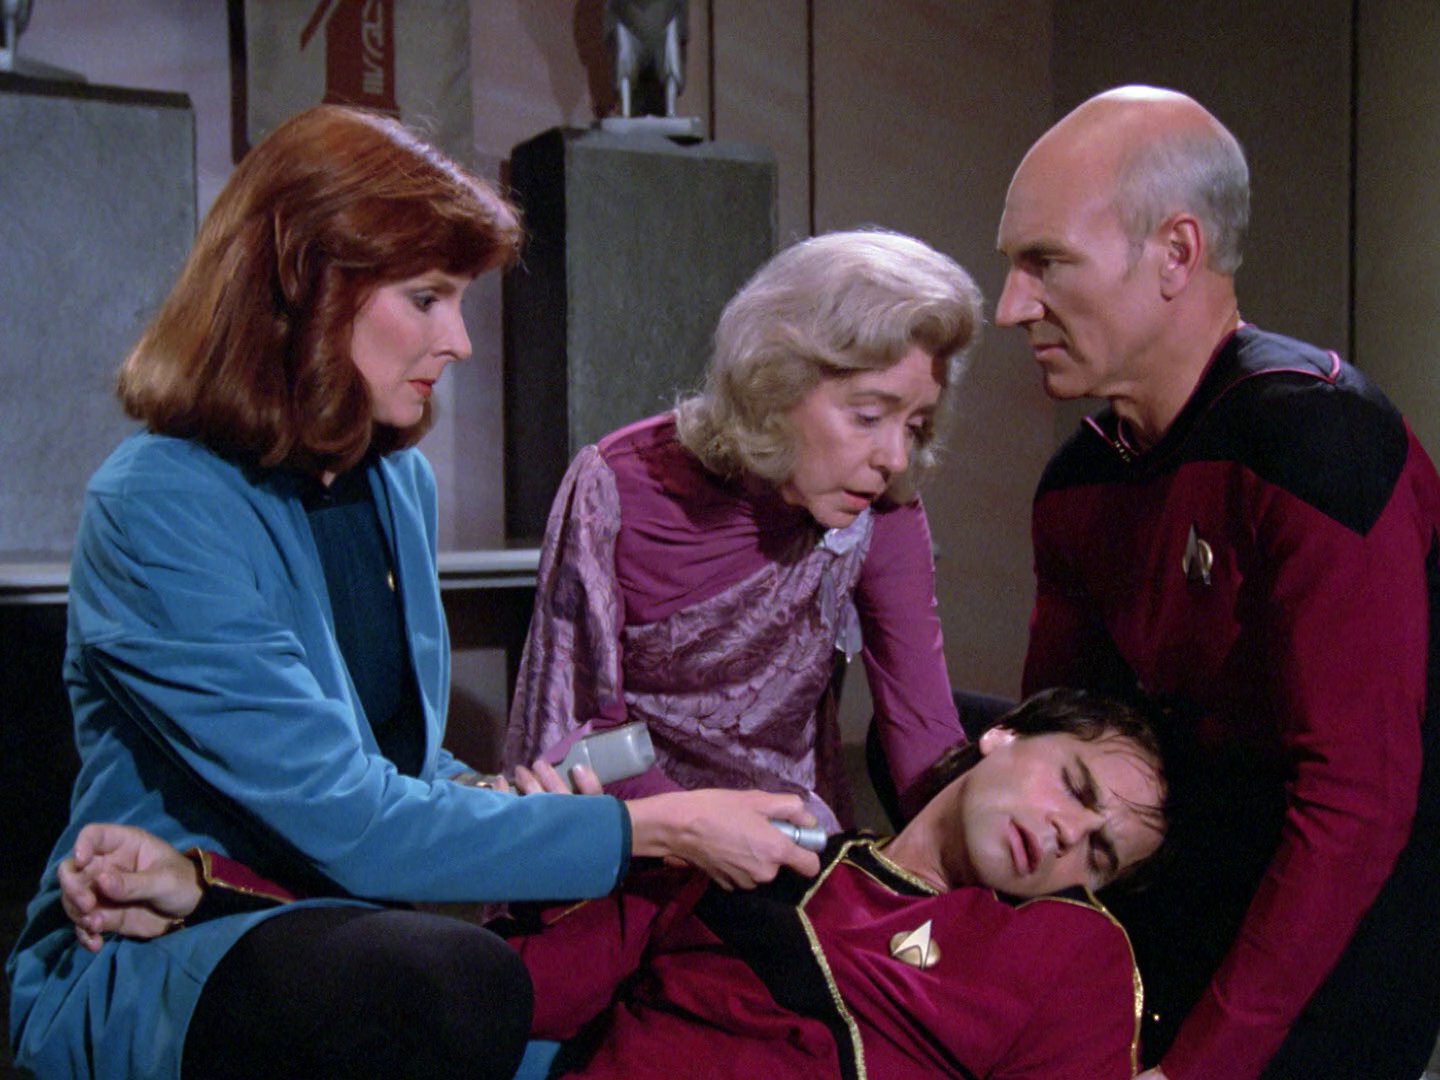 a star trek episode is still 'banned' in ireland 34 years after its release